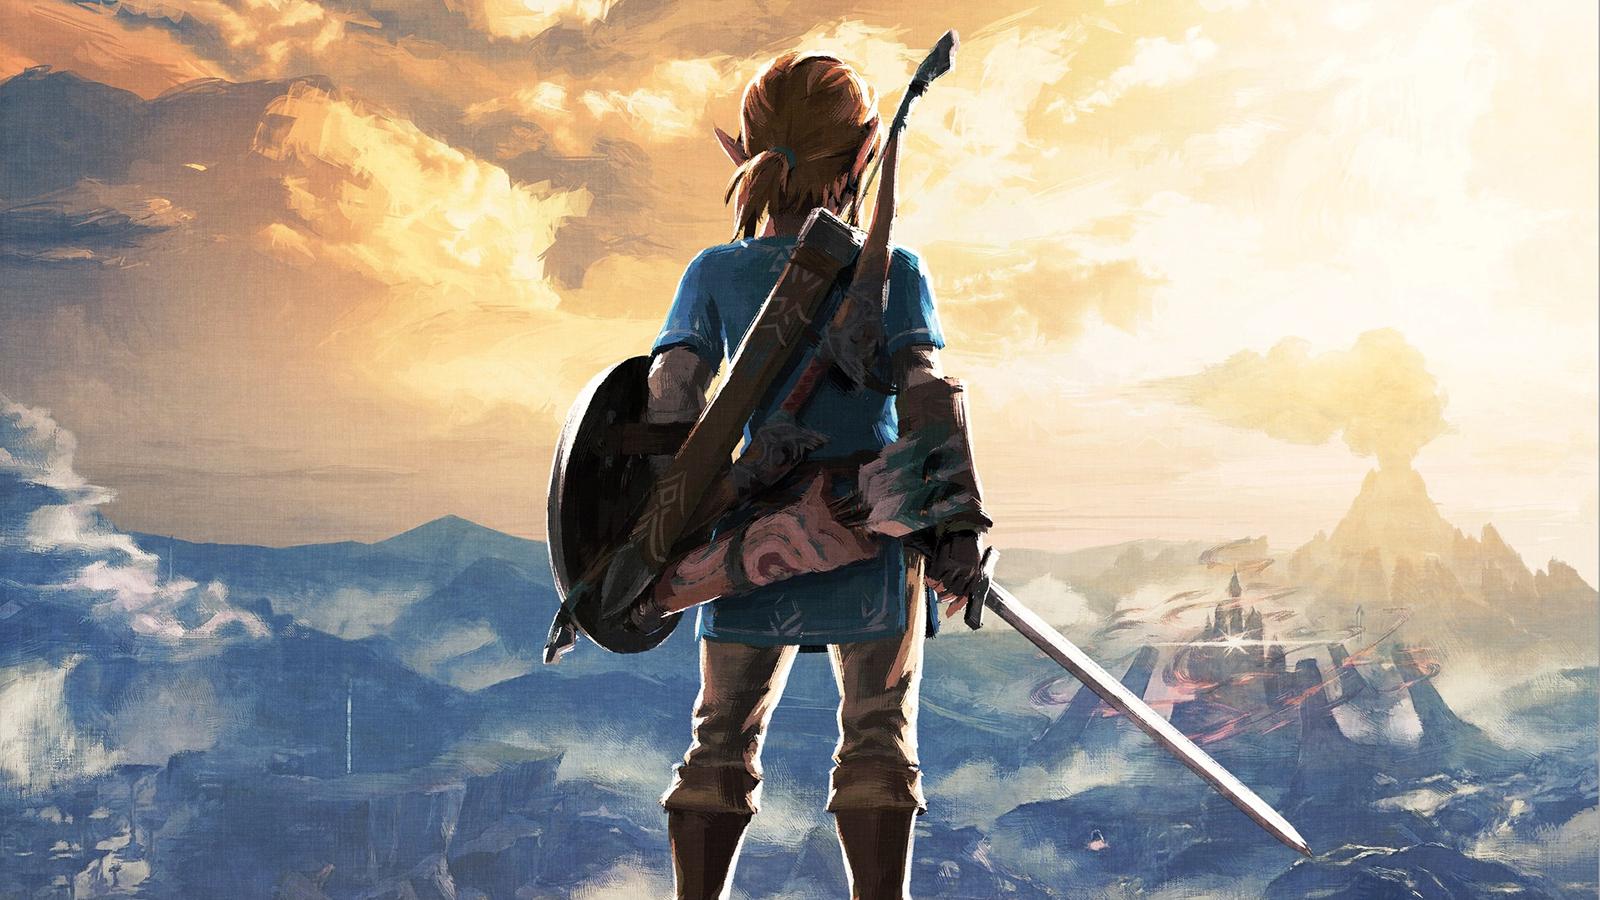 Promotional artwork for The Legend of Zelda: Breath of the Wild featuring Link.